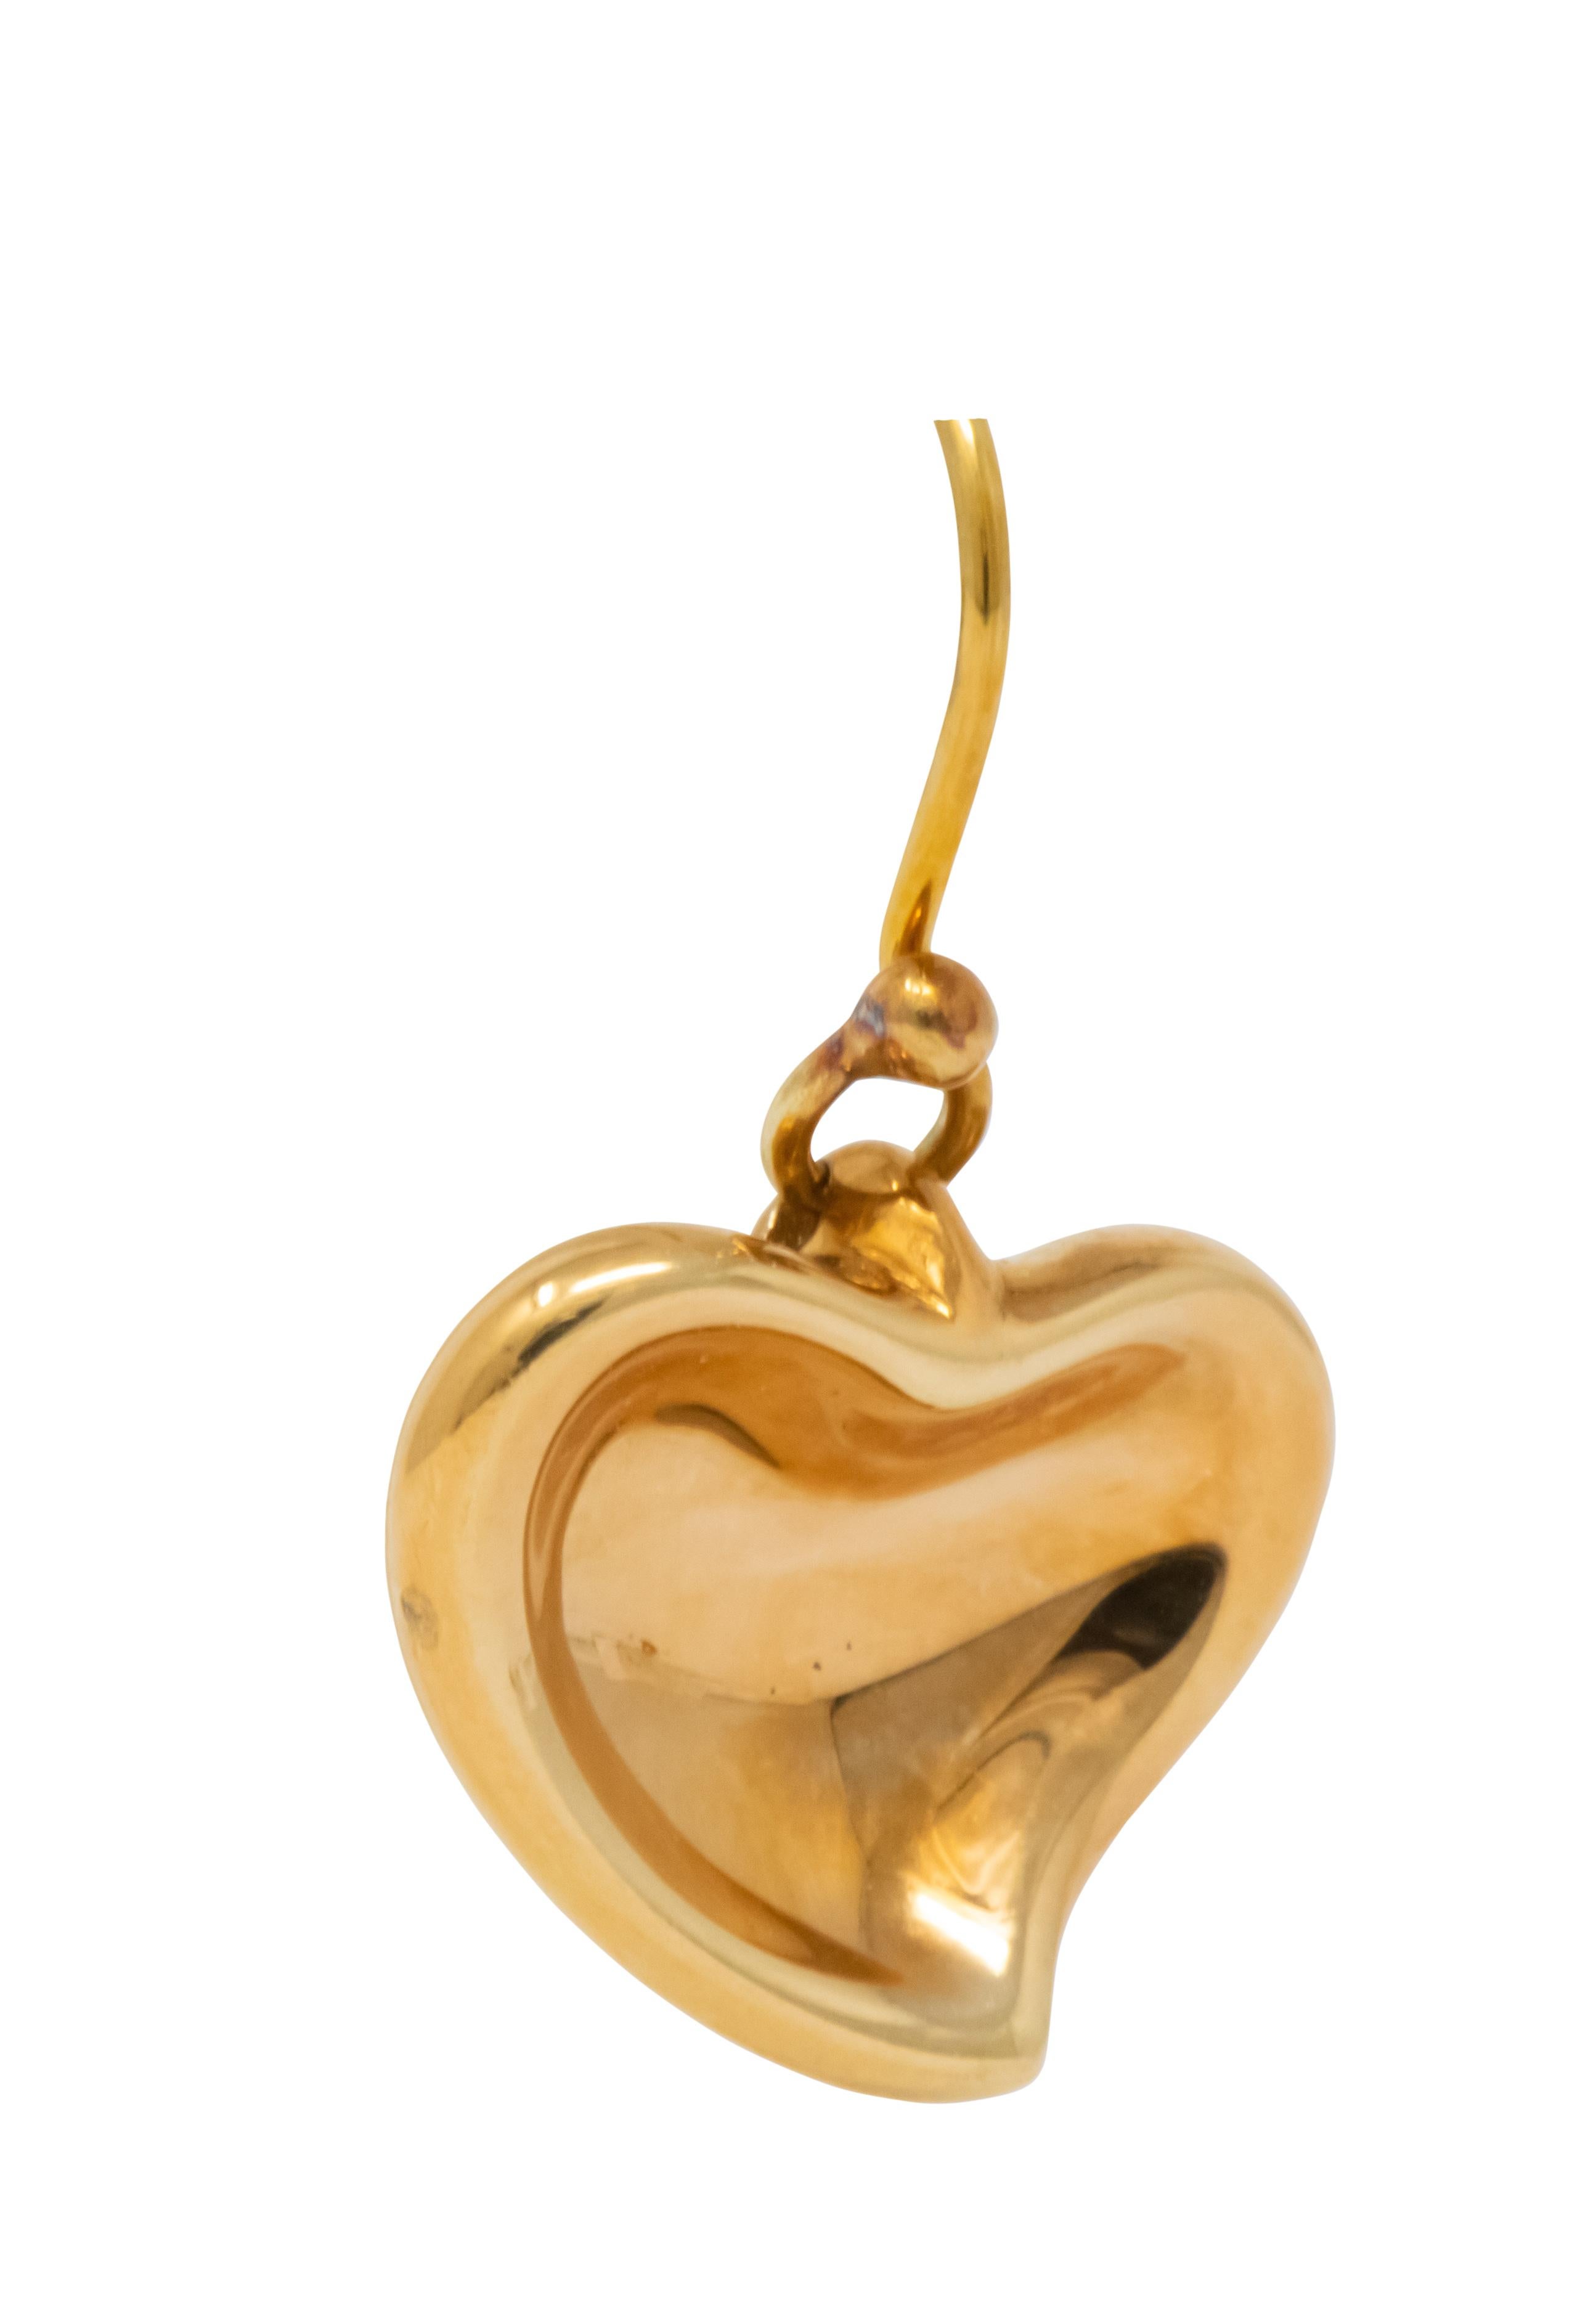 Each earring features a high polished gold abstract heart drop

With French hooks

Fully signed Elsa Peretti Tiffany & Co.

Stamped 750 and Spain

Measures: 1 x 9/16 inch

Total Weight: 9.5 grams

Dainty. Splendid. Mod.

Stock Number: We-2726